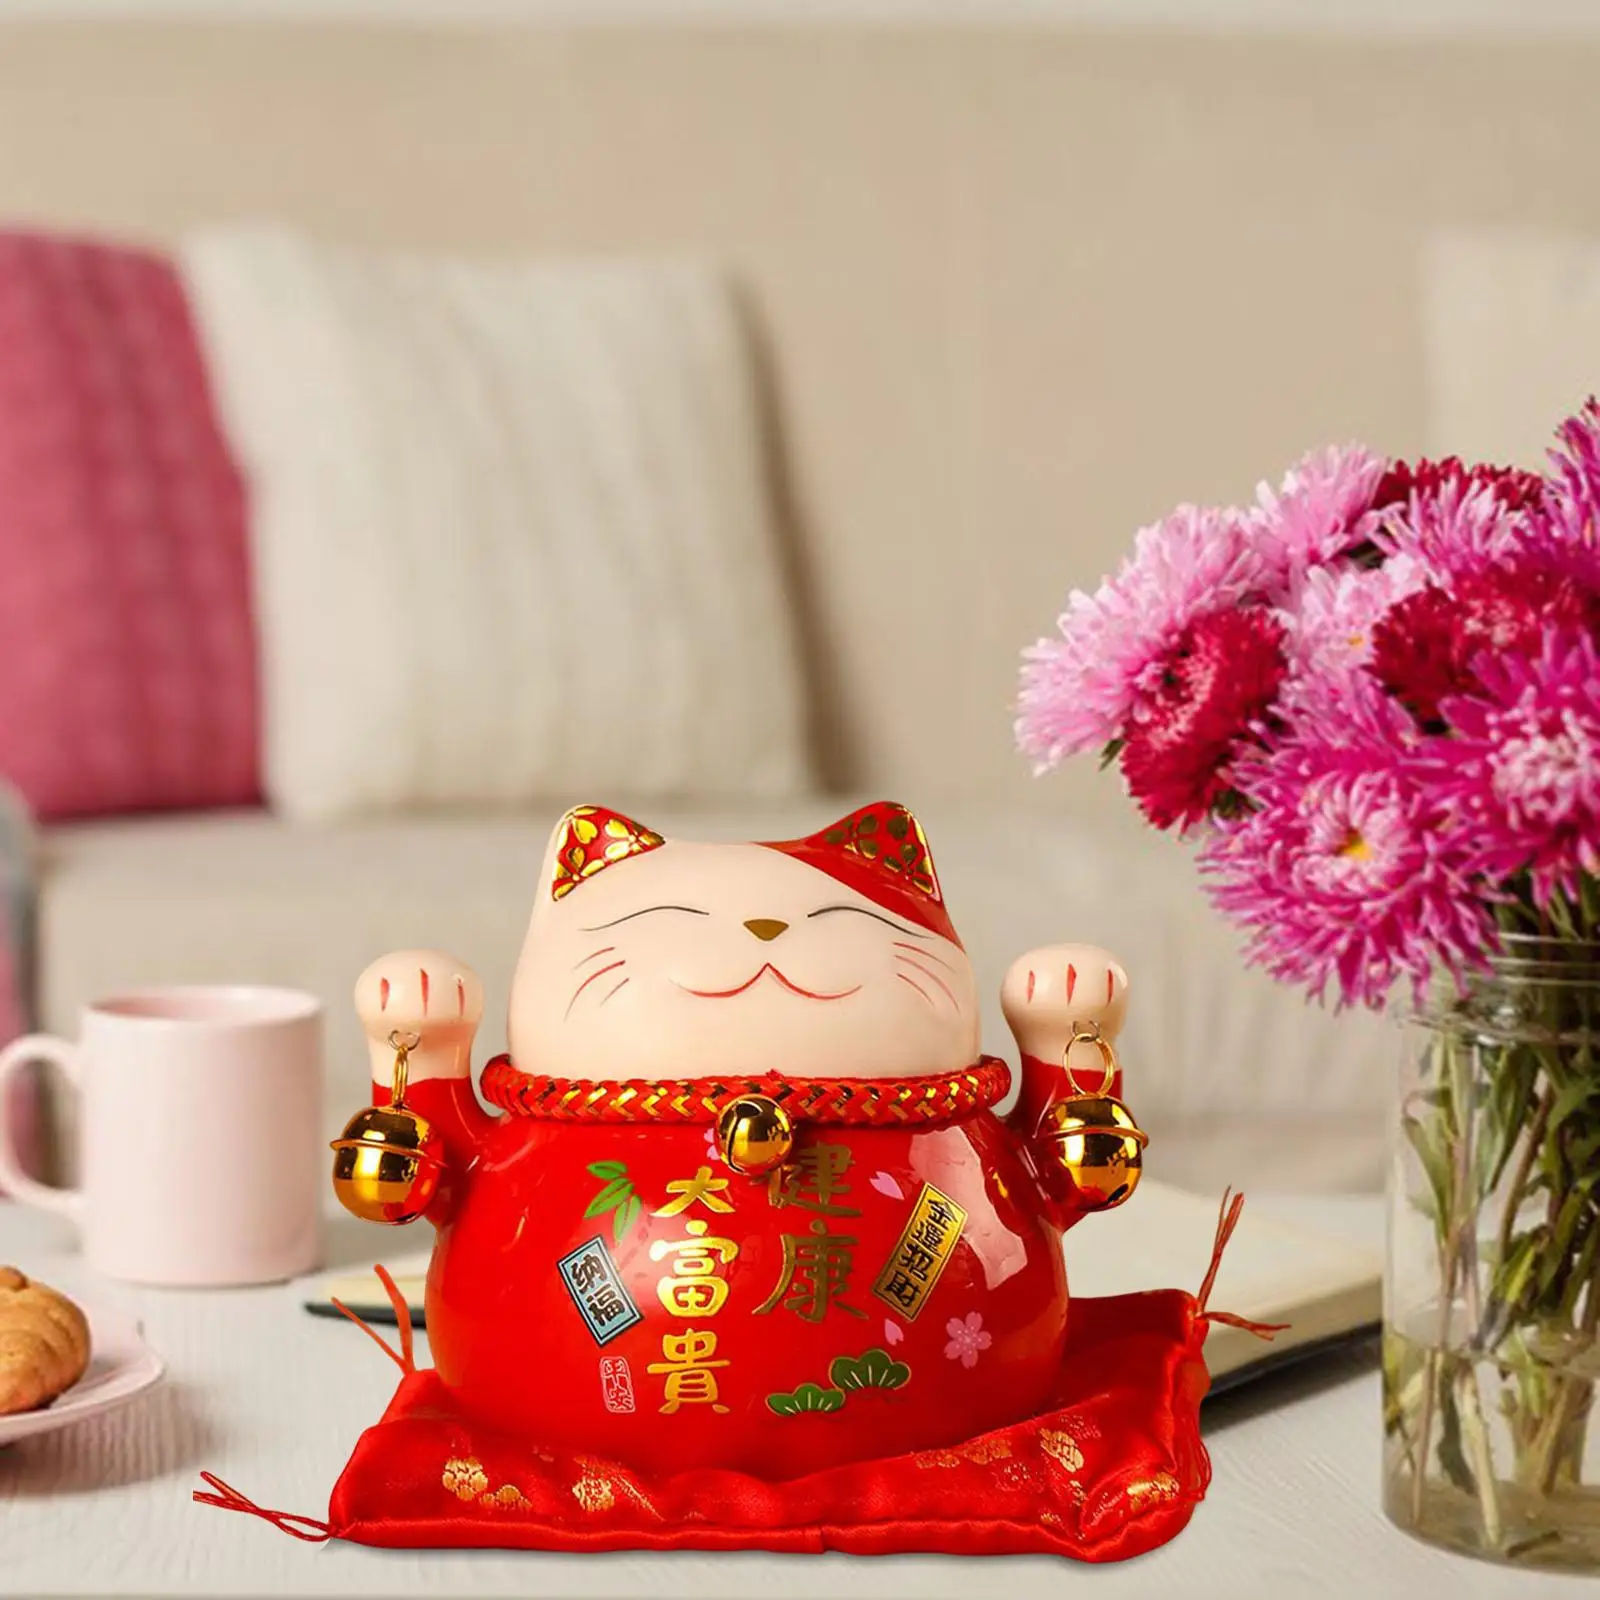 Feng Shui Lucky Cat Money Bank Statues with Bell Crafts Decoration Home Decor Display Ceramic for Desktop Gift Presents Office